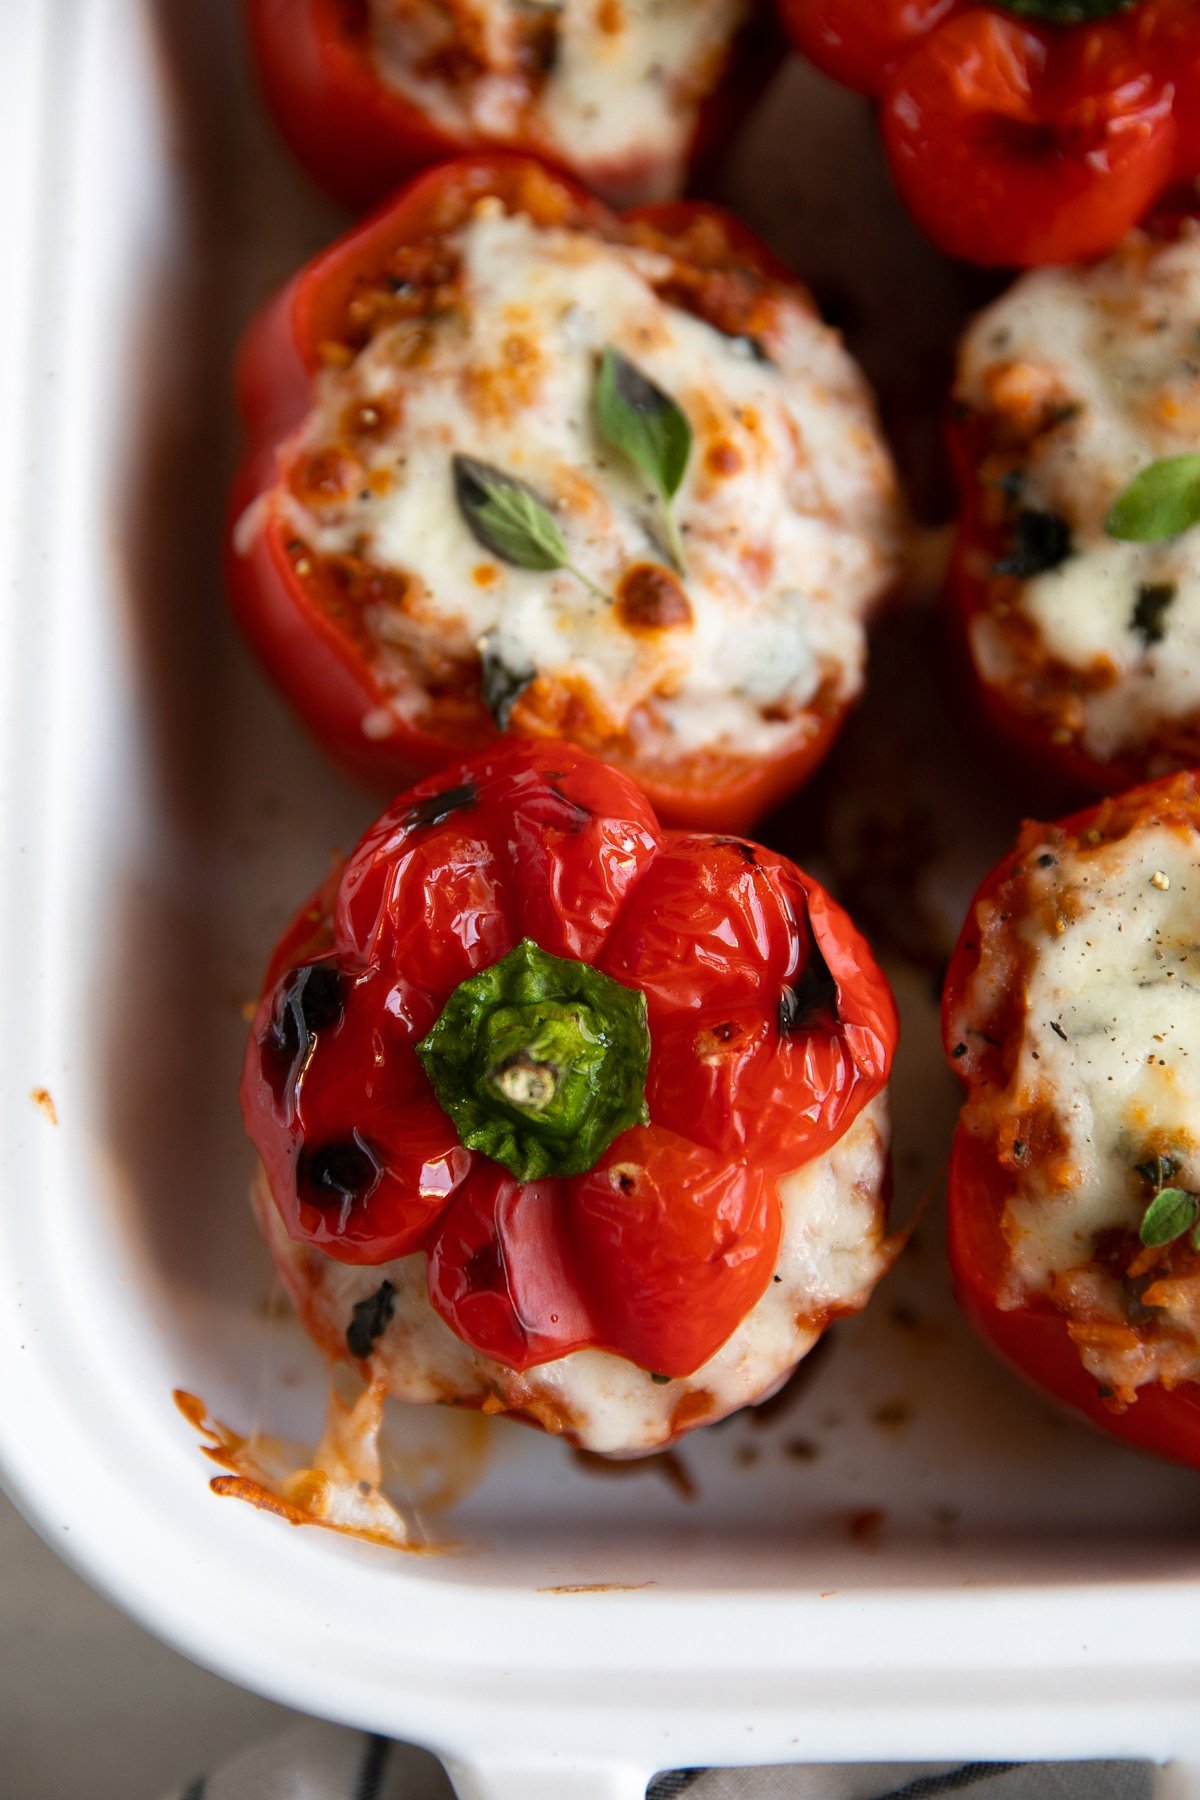 Stuffed and baked red bell peppers topped with mozzarella cheese and fresh oregano.